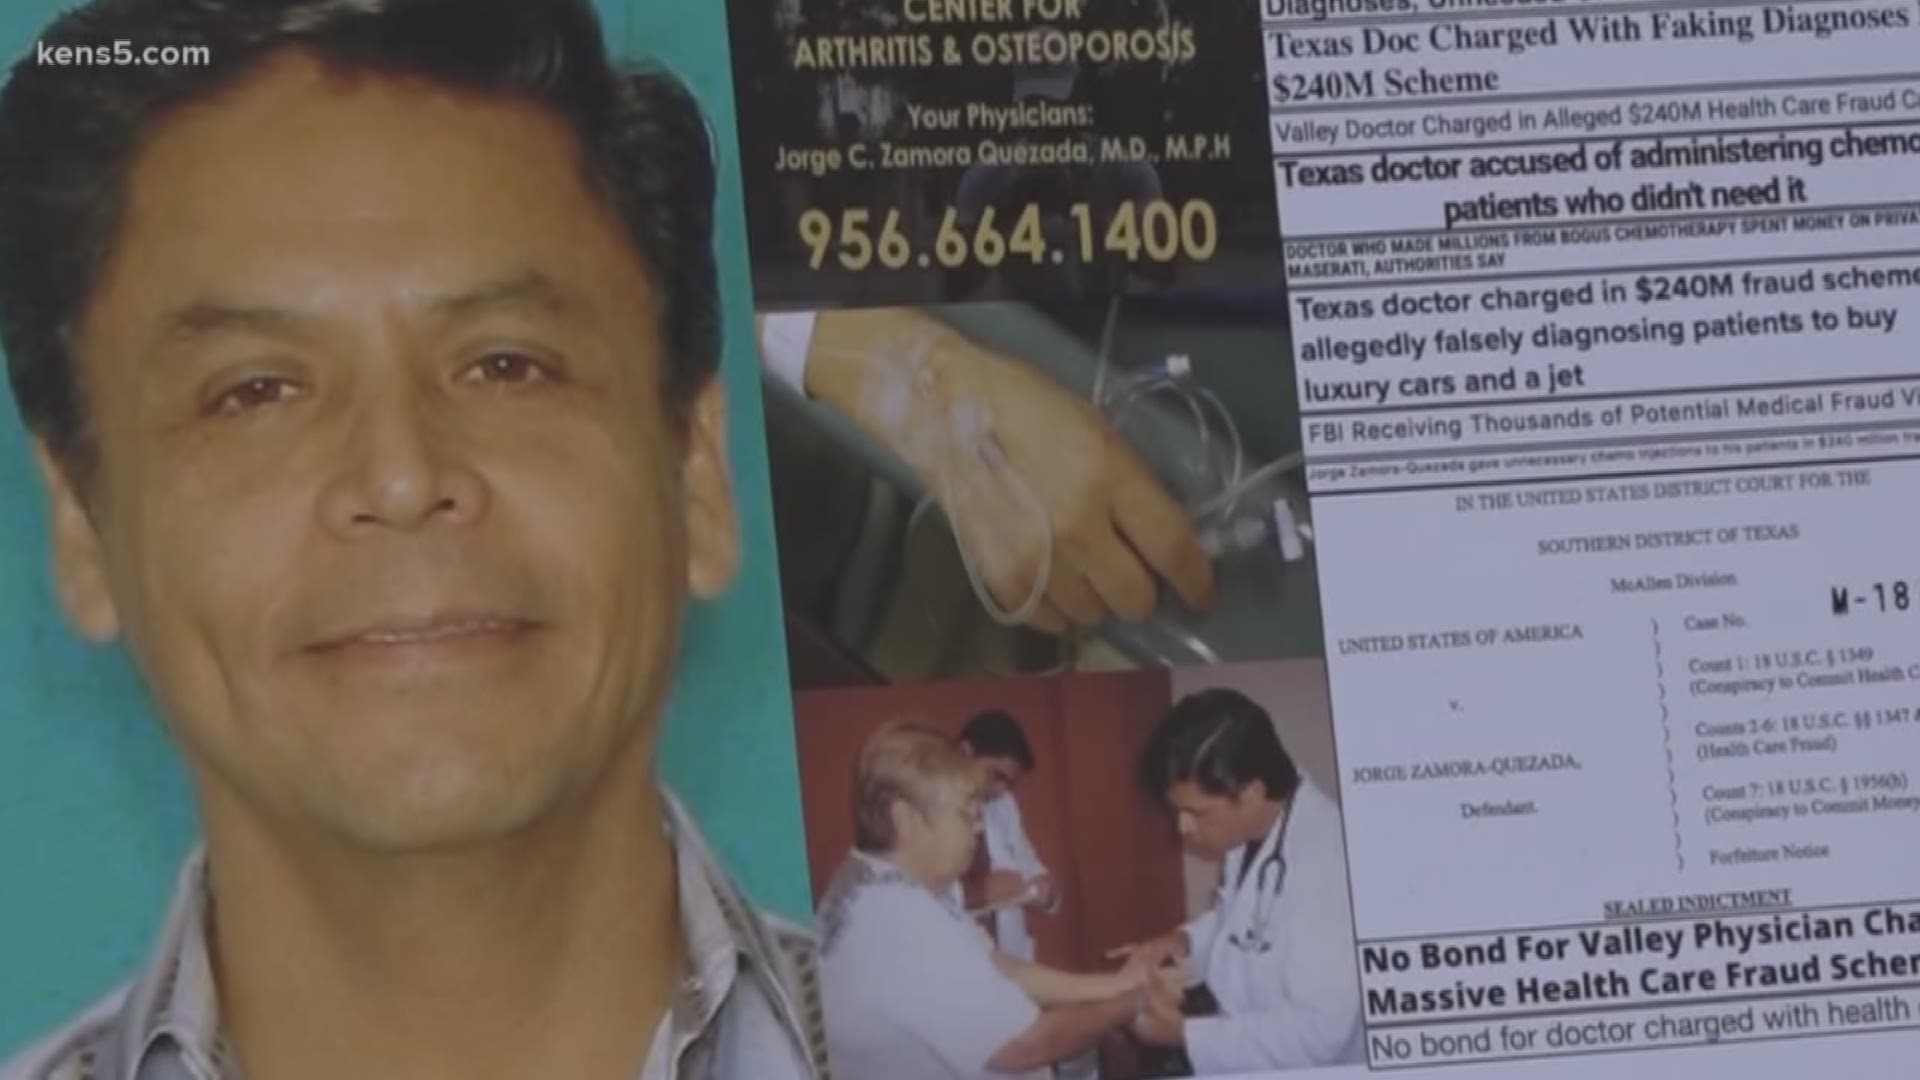 The ultimate doctor betrayal: A false diagnosis and unnecessary cancer treatment. Two women claim they endured it for years. Eyewitness News reporter Adi Guajardo has more.